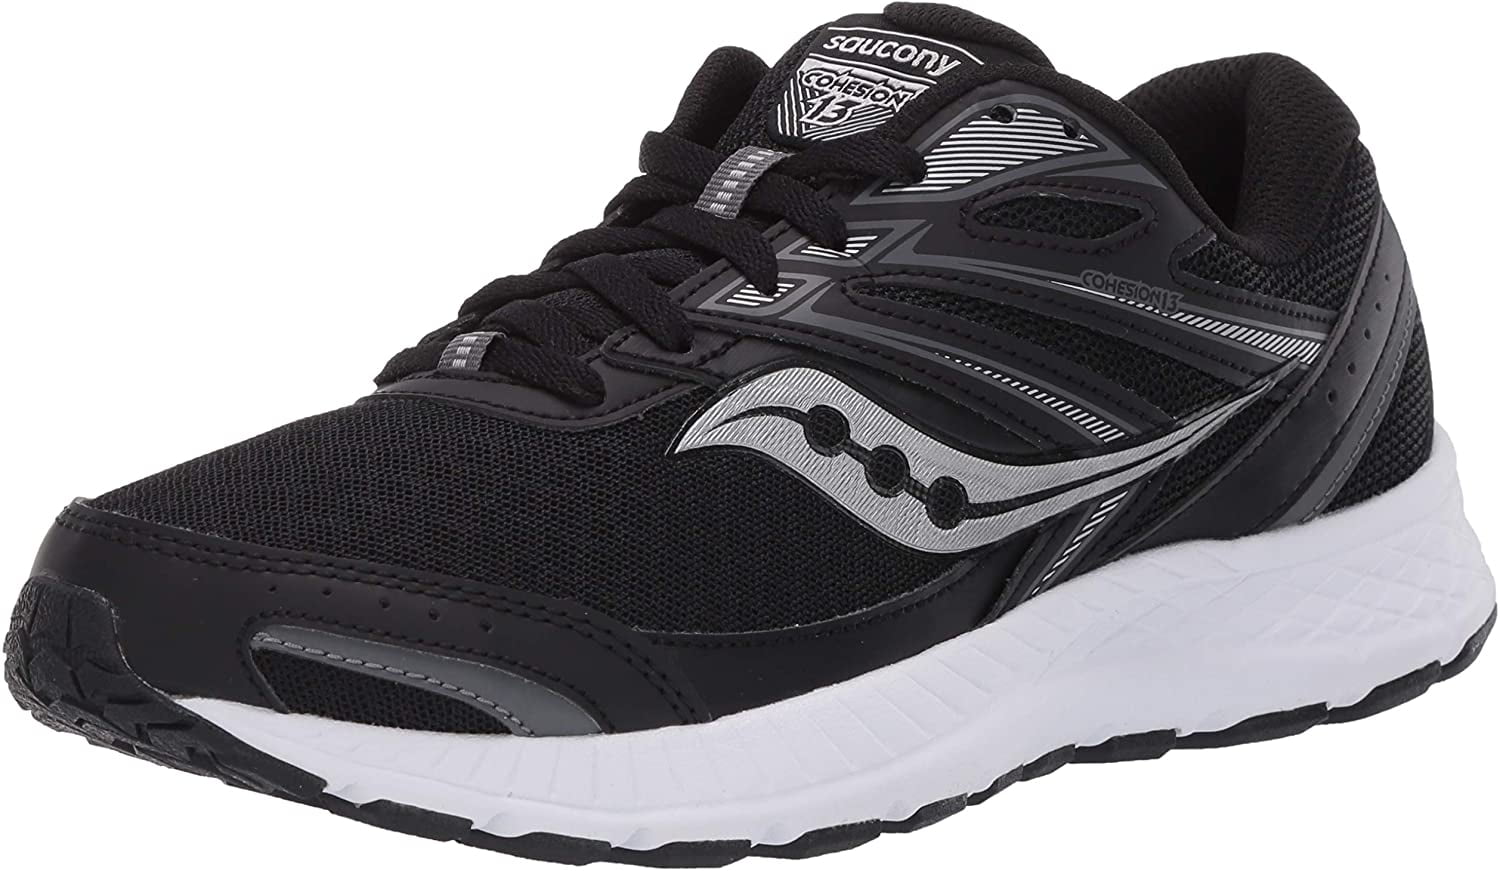 saucony black and white shoes